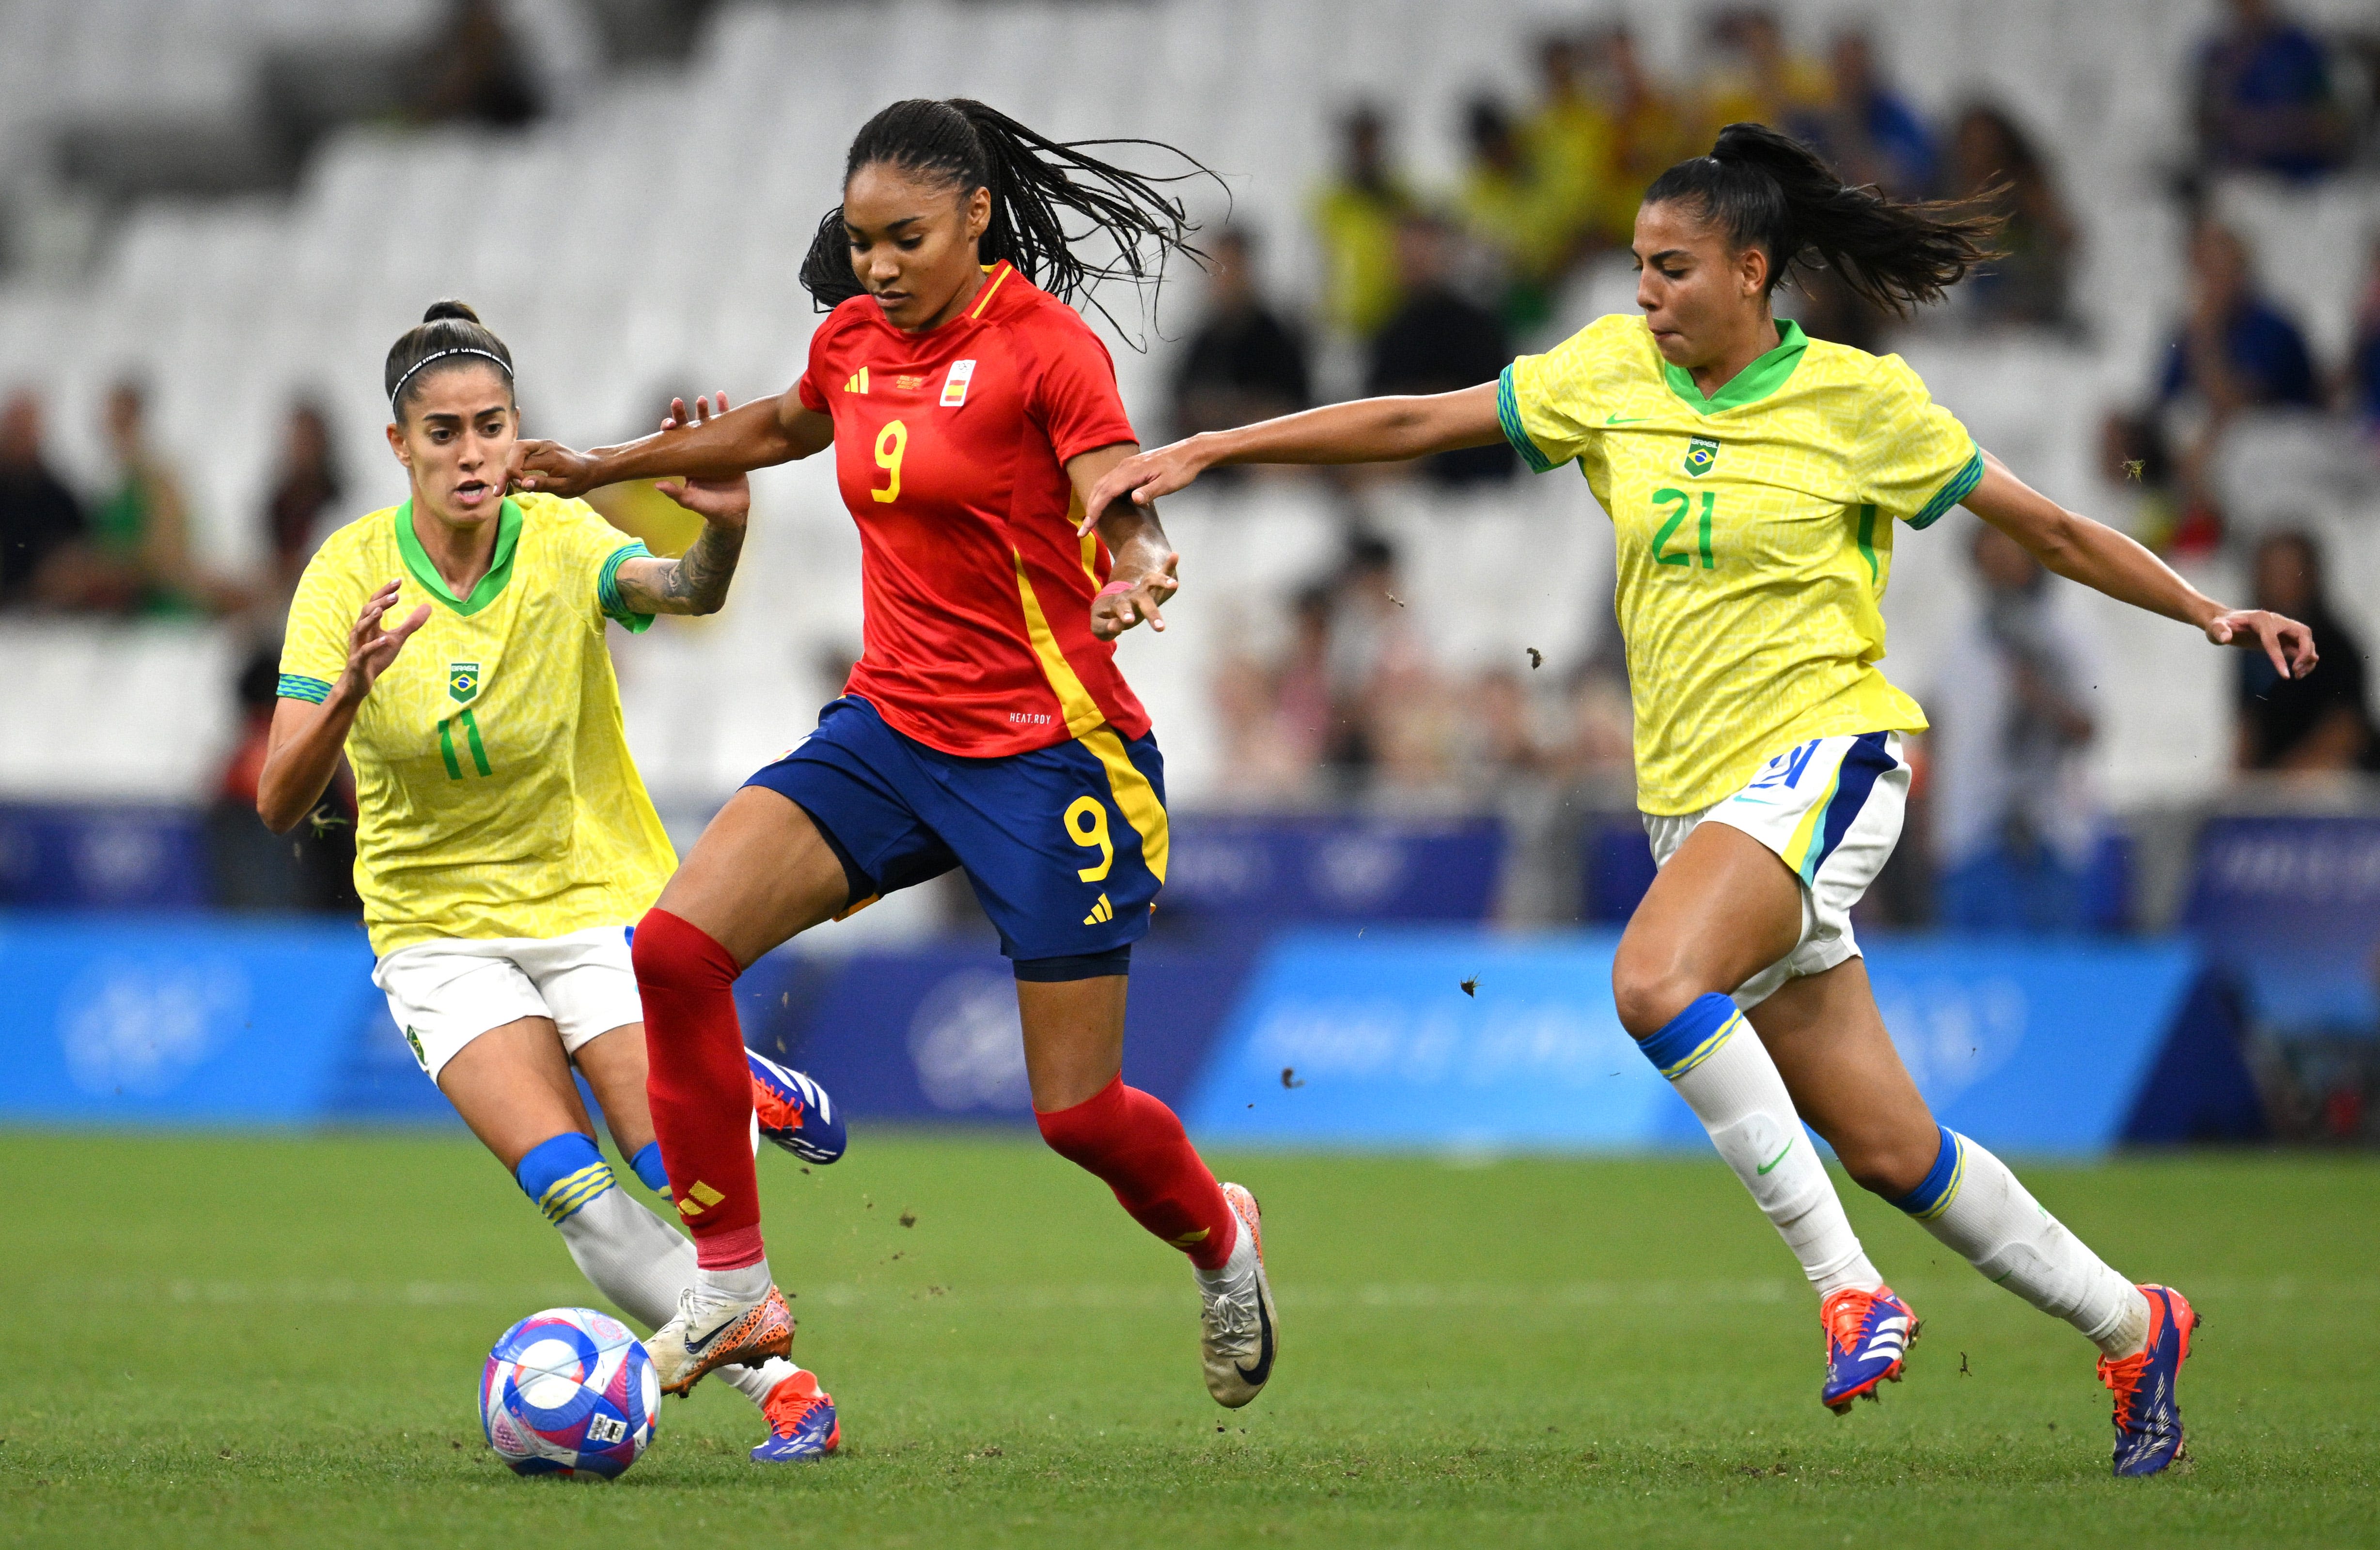 Olympic women's soccer final: Bracket, schedule for US-Brazil gold medal game